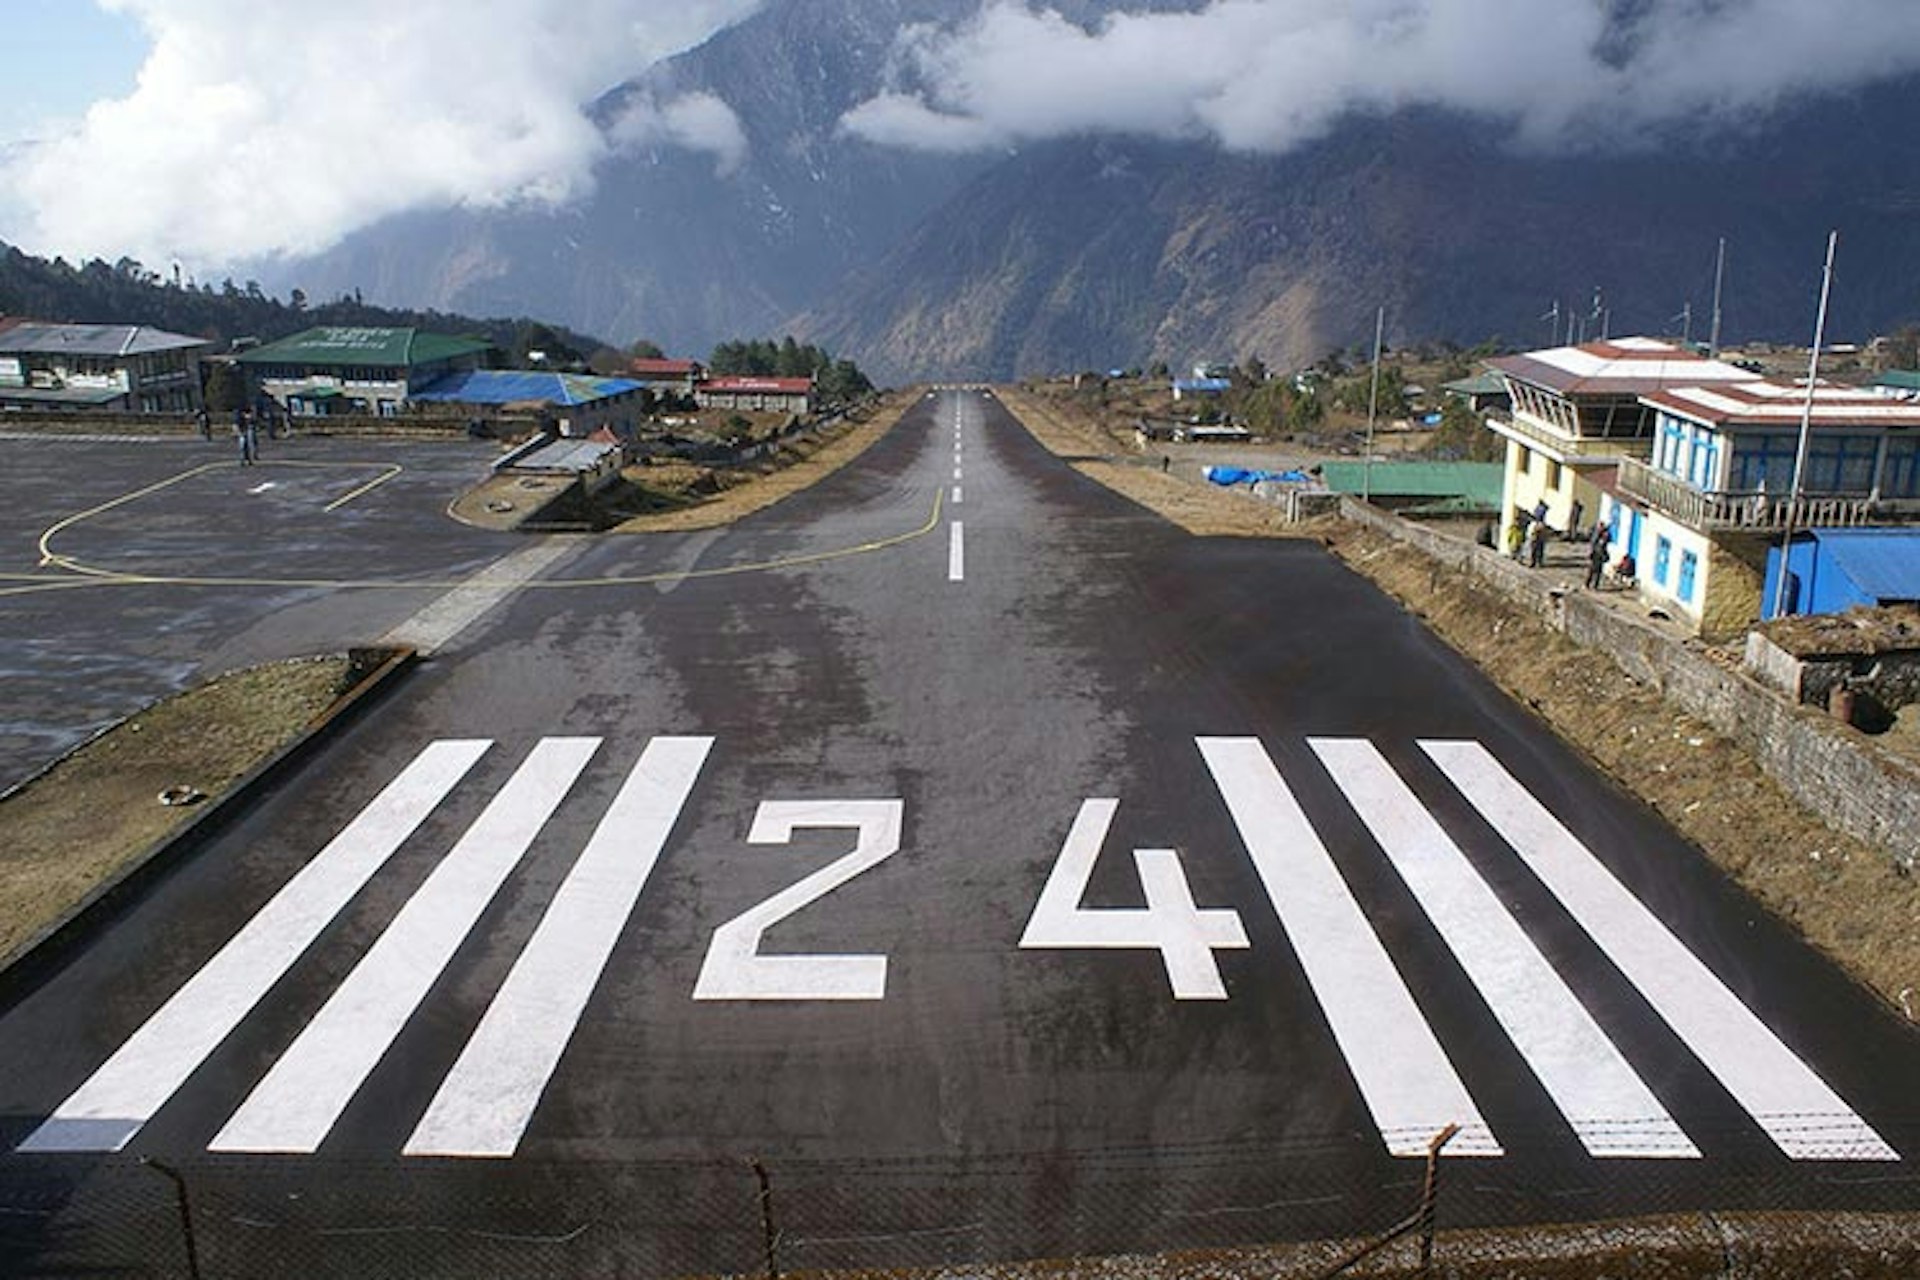 The daunting sight confronting pilots preparing to take off from Tenzing-Hillary Airport, Nepal. Image from Wikimedia Commons.